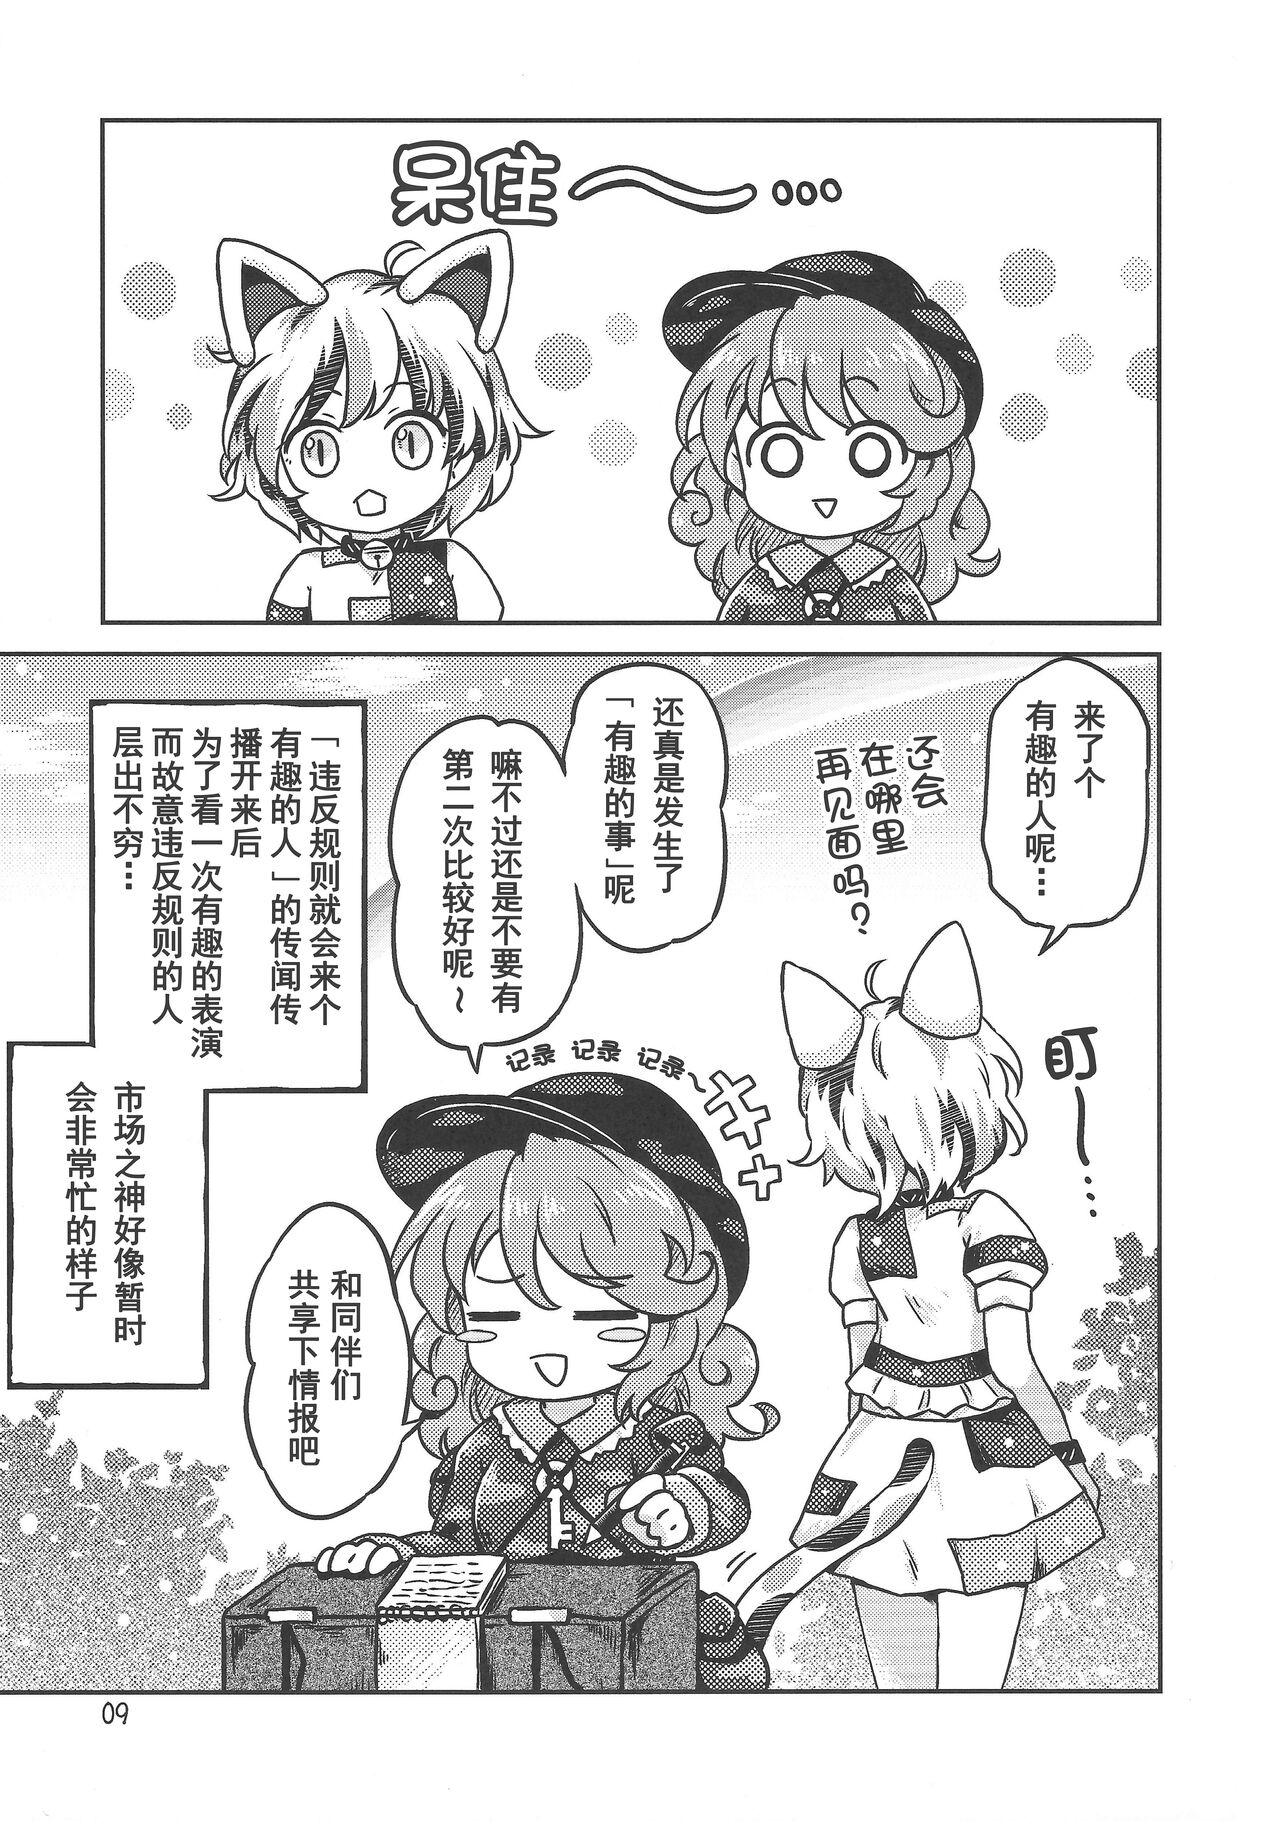 Whatsapp 《千亦酱的活动日志》 - Touhou project Sologirl - Page 9